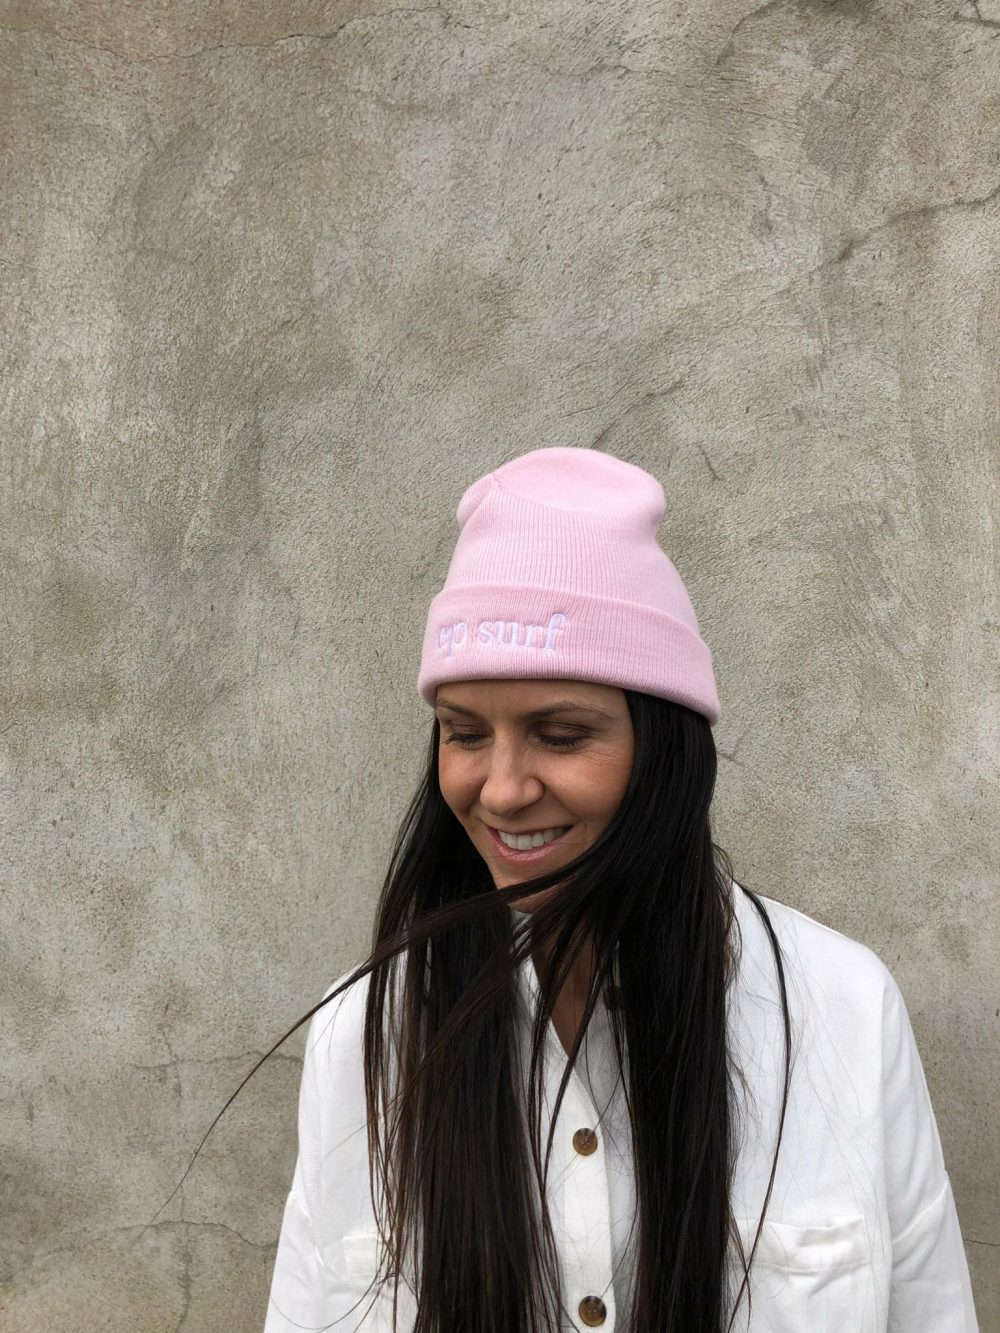 EPBCORE Pink/white Ep Surf Ep Beanie Core Generic Beanies Accessories Accessories